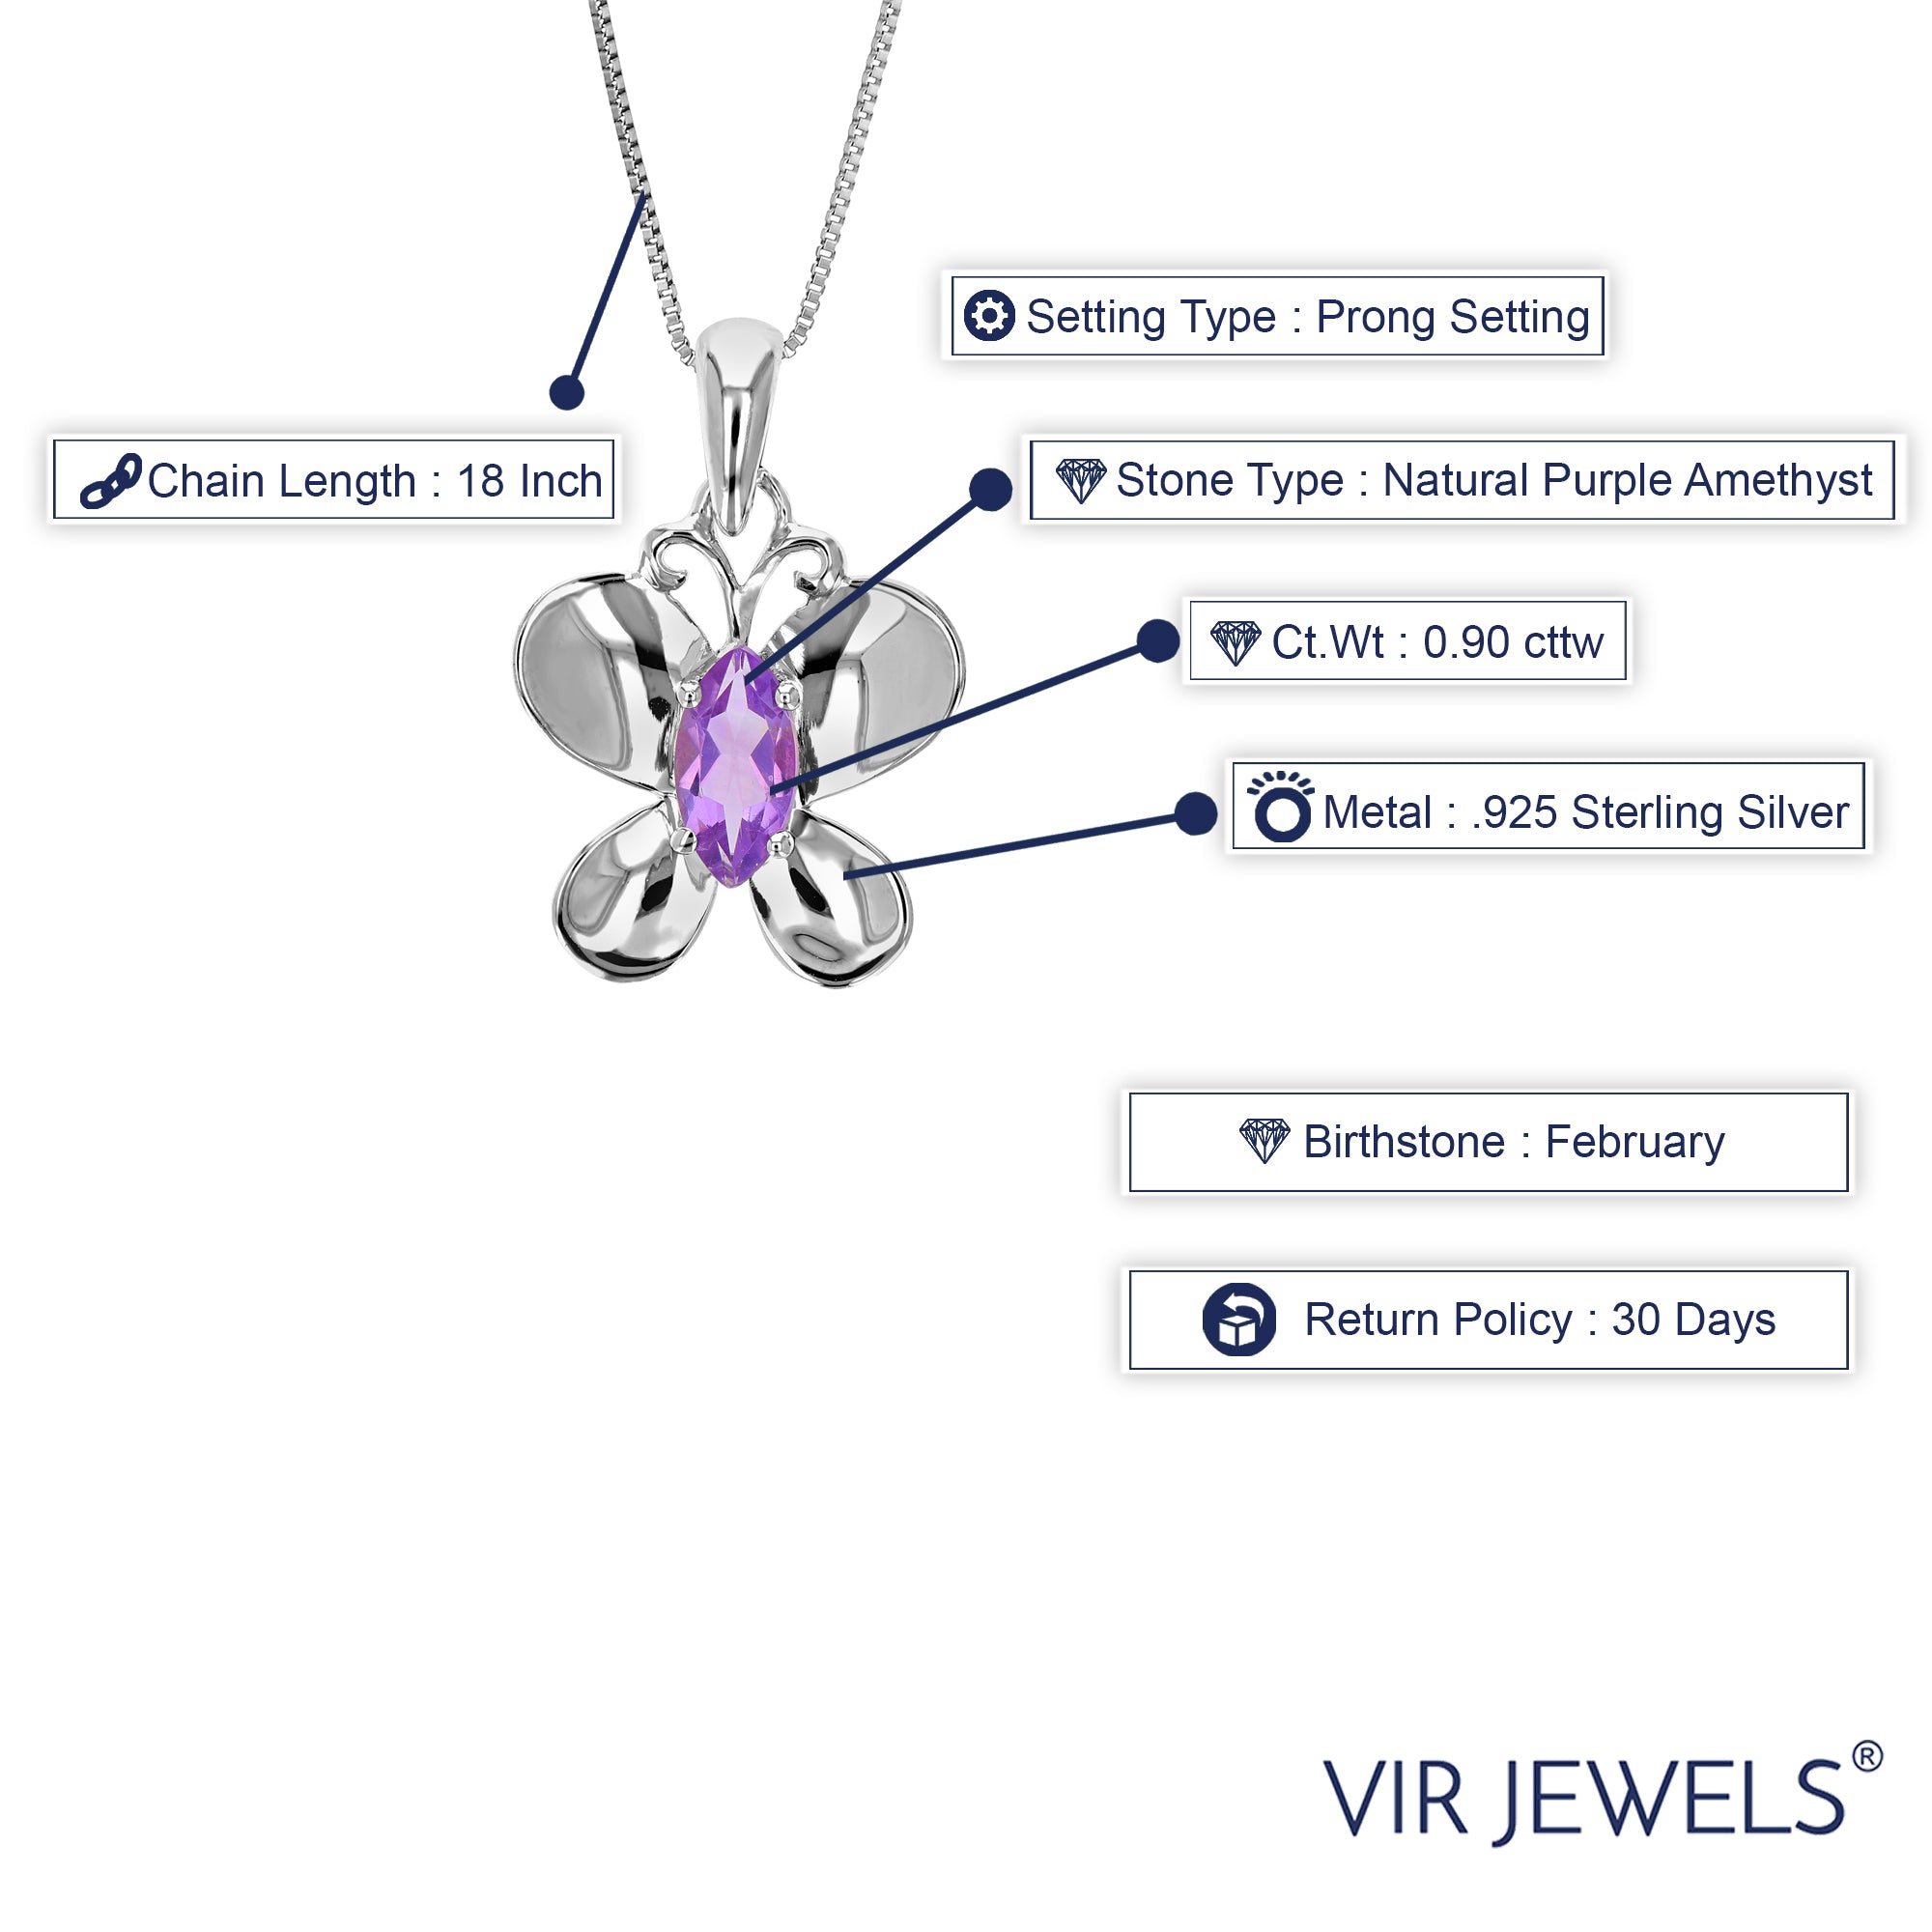 0.90 cttw Pendant Necklace, Purple Amethyst Marquise Pendant Necklace for Women in .925 Sterling Silver with Rhodium, 18 Inch Chain, Prong Setting